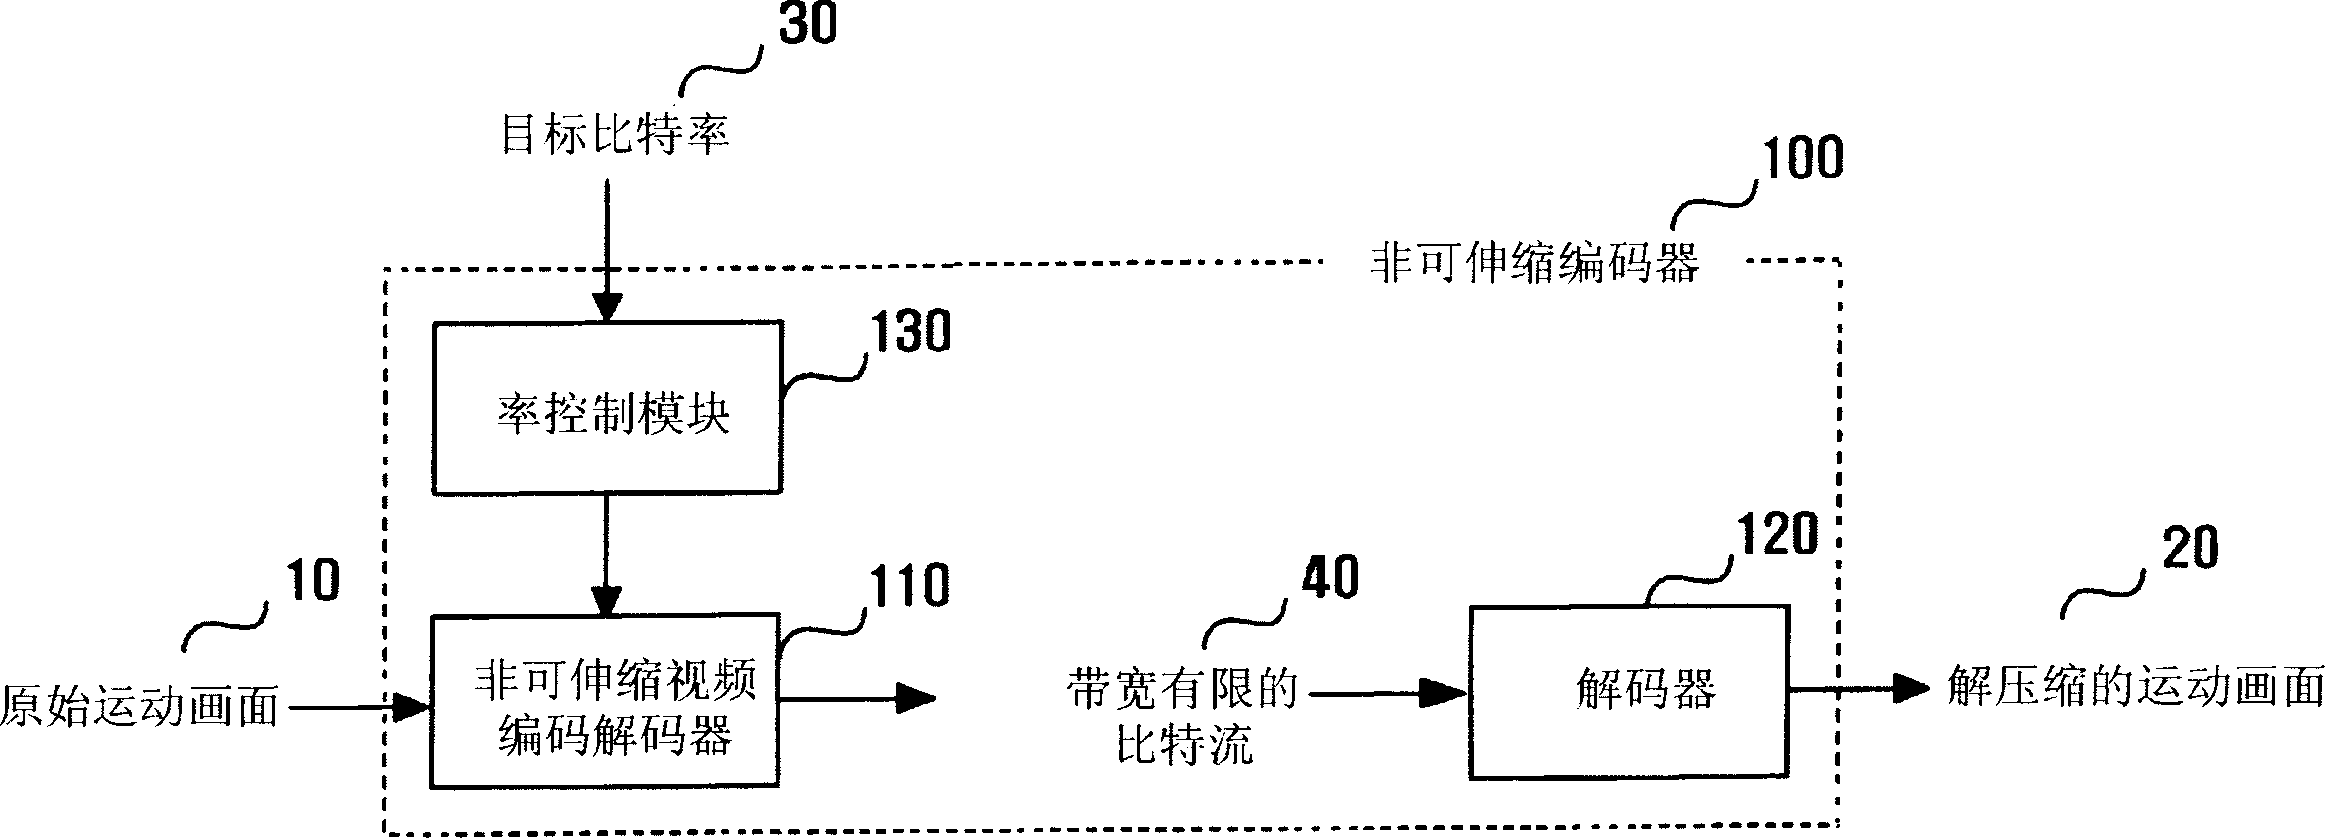 Scalable video coding method and apparatus using pre-decoder